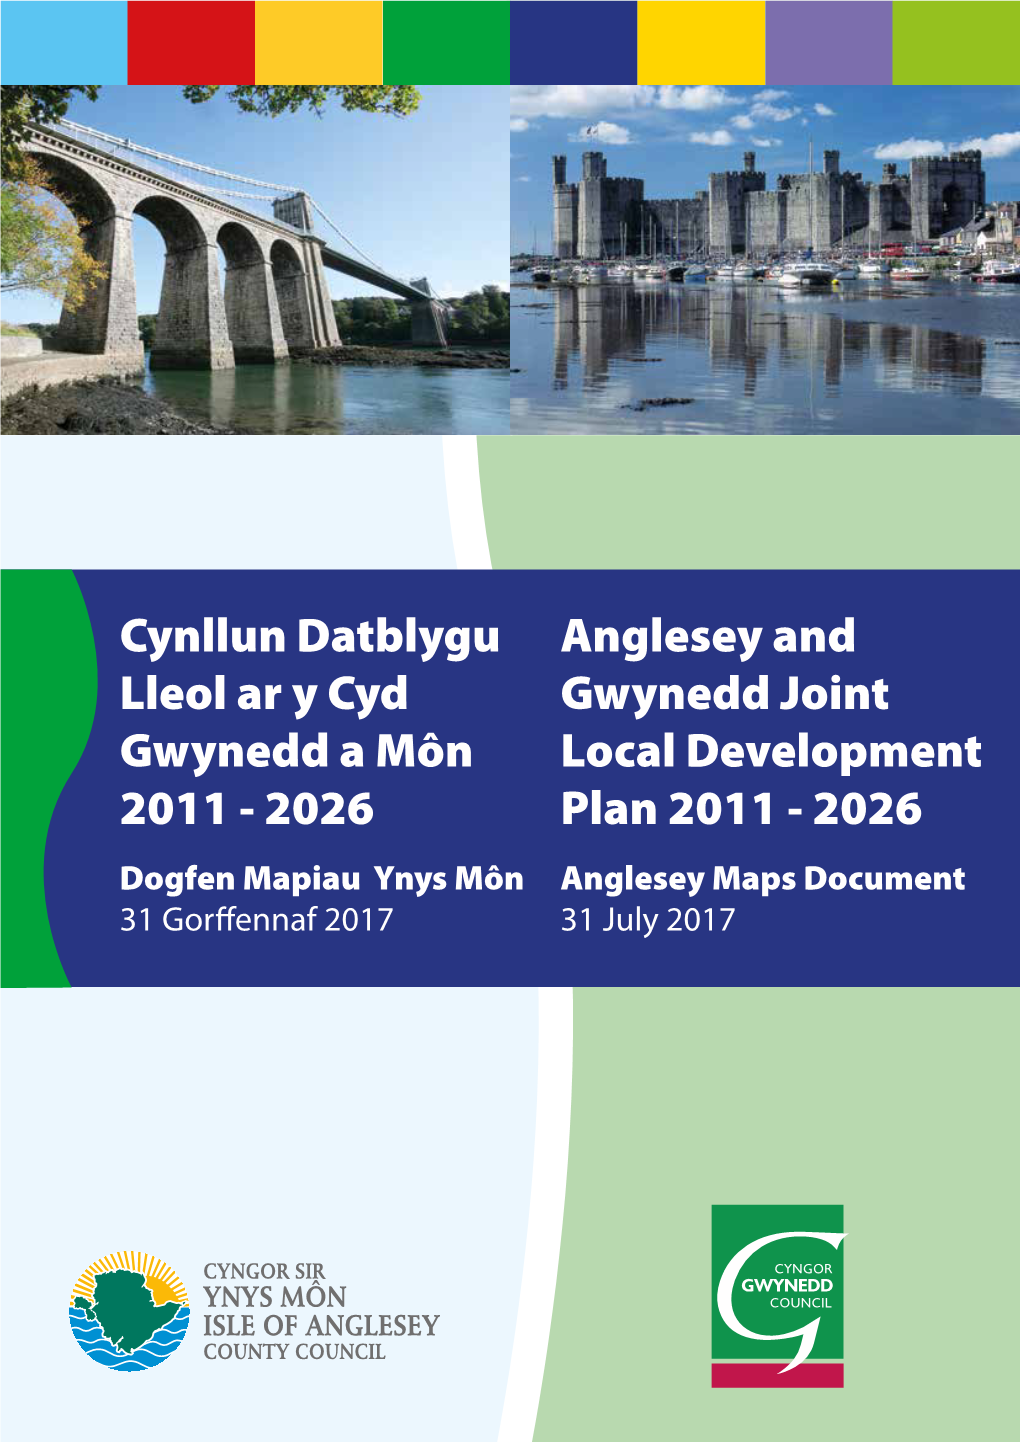 2026 Anglesey and Gwynedd Joint Local Development Plan 2011